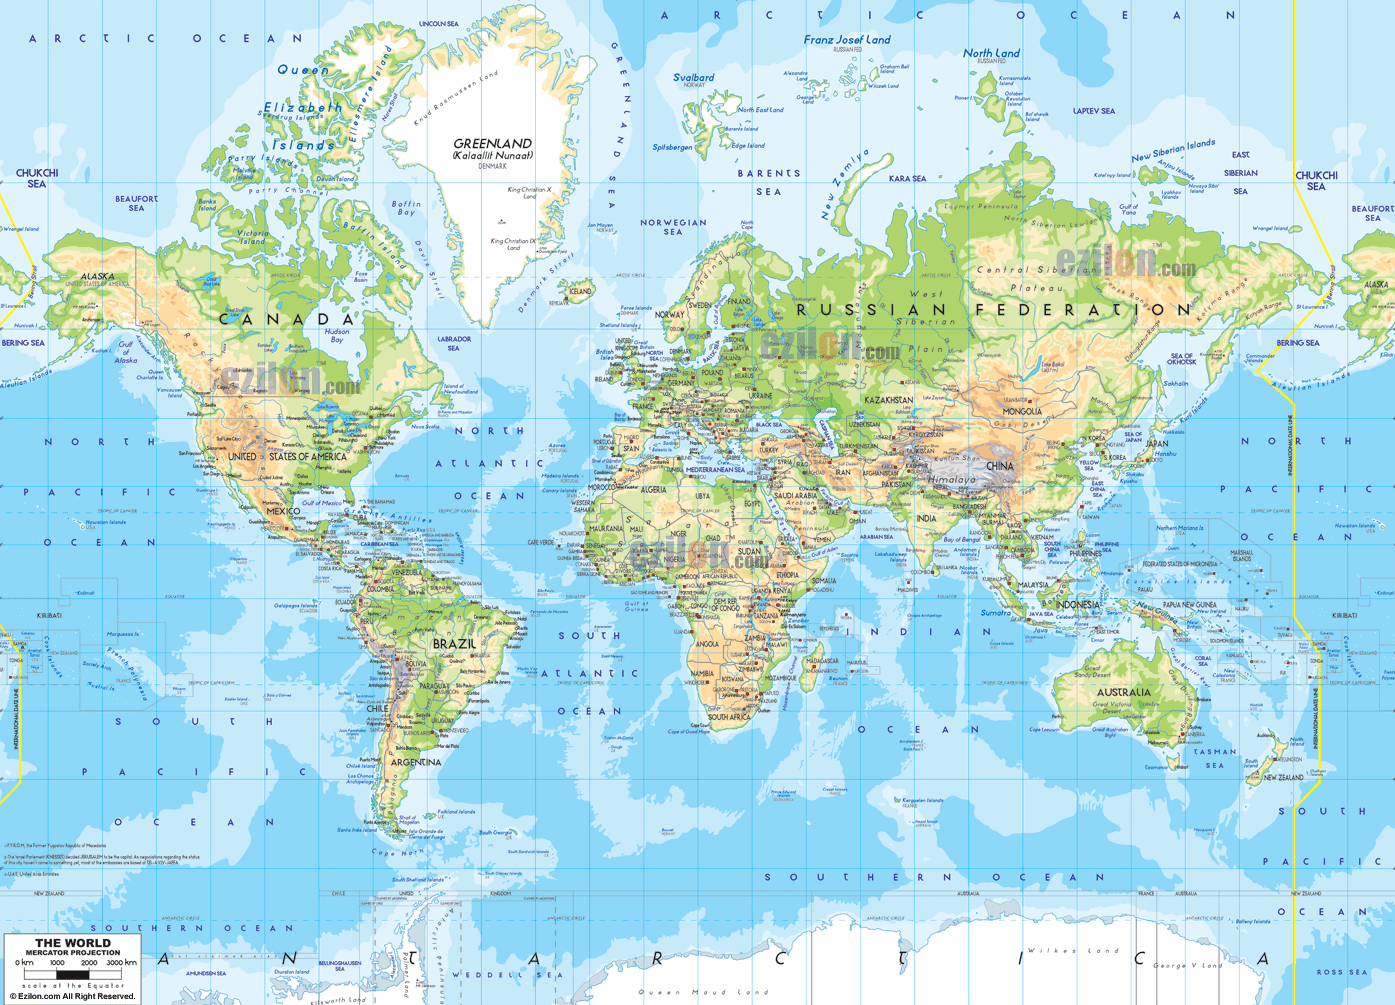 Detailed physical map of the world which shows earth's landforms like mountains, deserts, plains, bodies of water such as lakes, rivers, oceans and other geographical or topographic features.